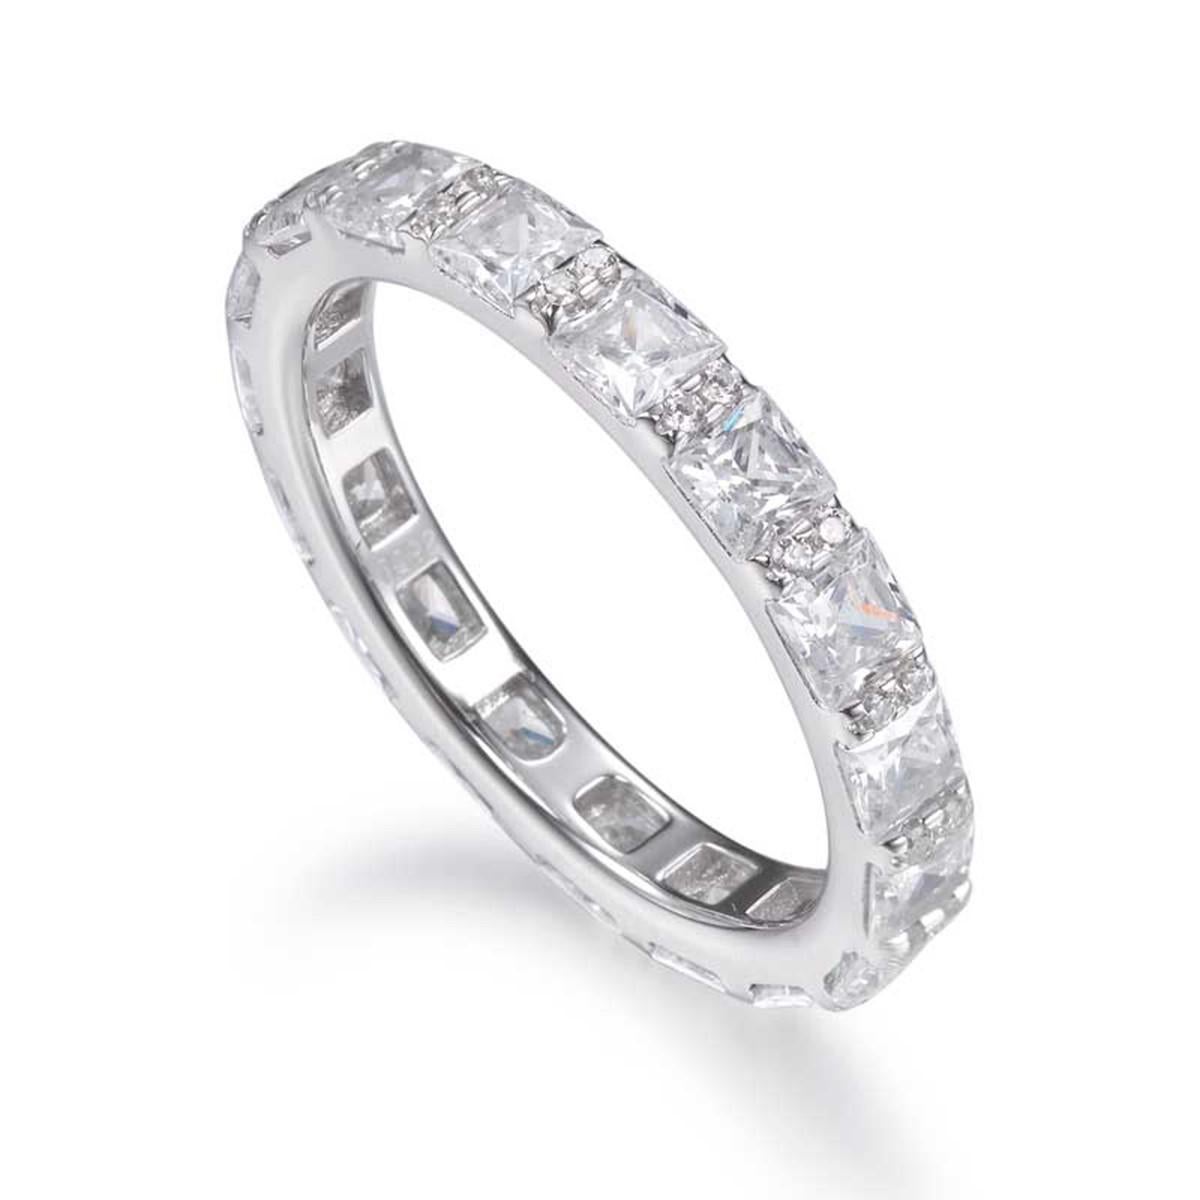 The timeless elegance of this full eternity ring showcases a combination of seventeen perfectly matched princess cut cubic zirconia interspersed with 34 smaller round brilliant cut cubic zirconia. 

Composed of 925 sterling silver with a high gloss